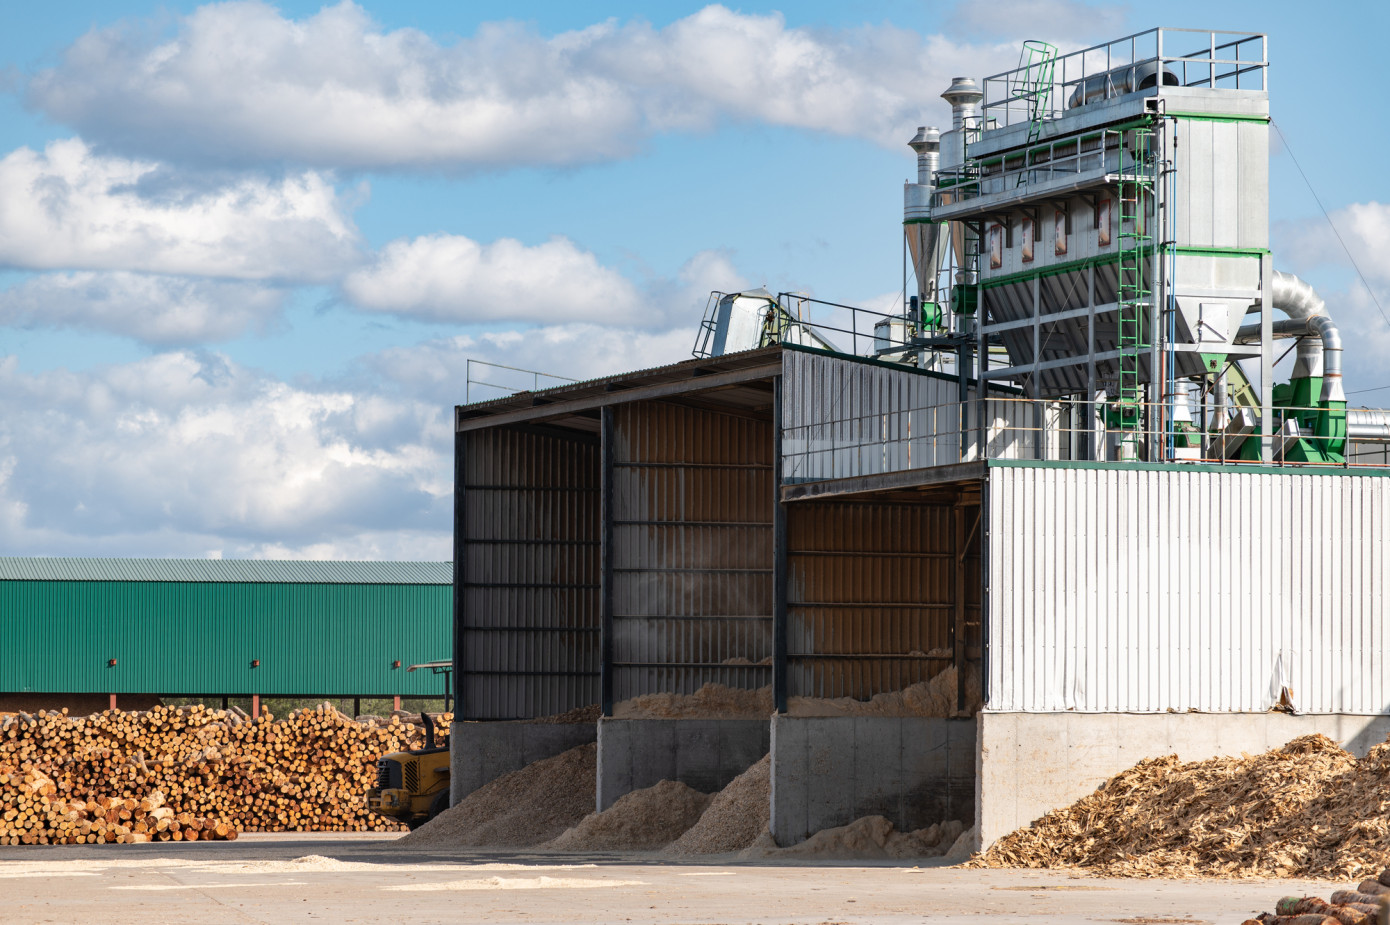 In November, price for wood chips imported to Japan grows 5%